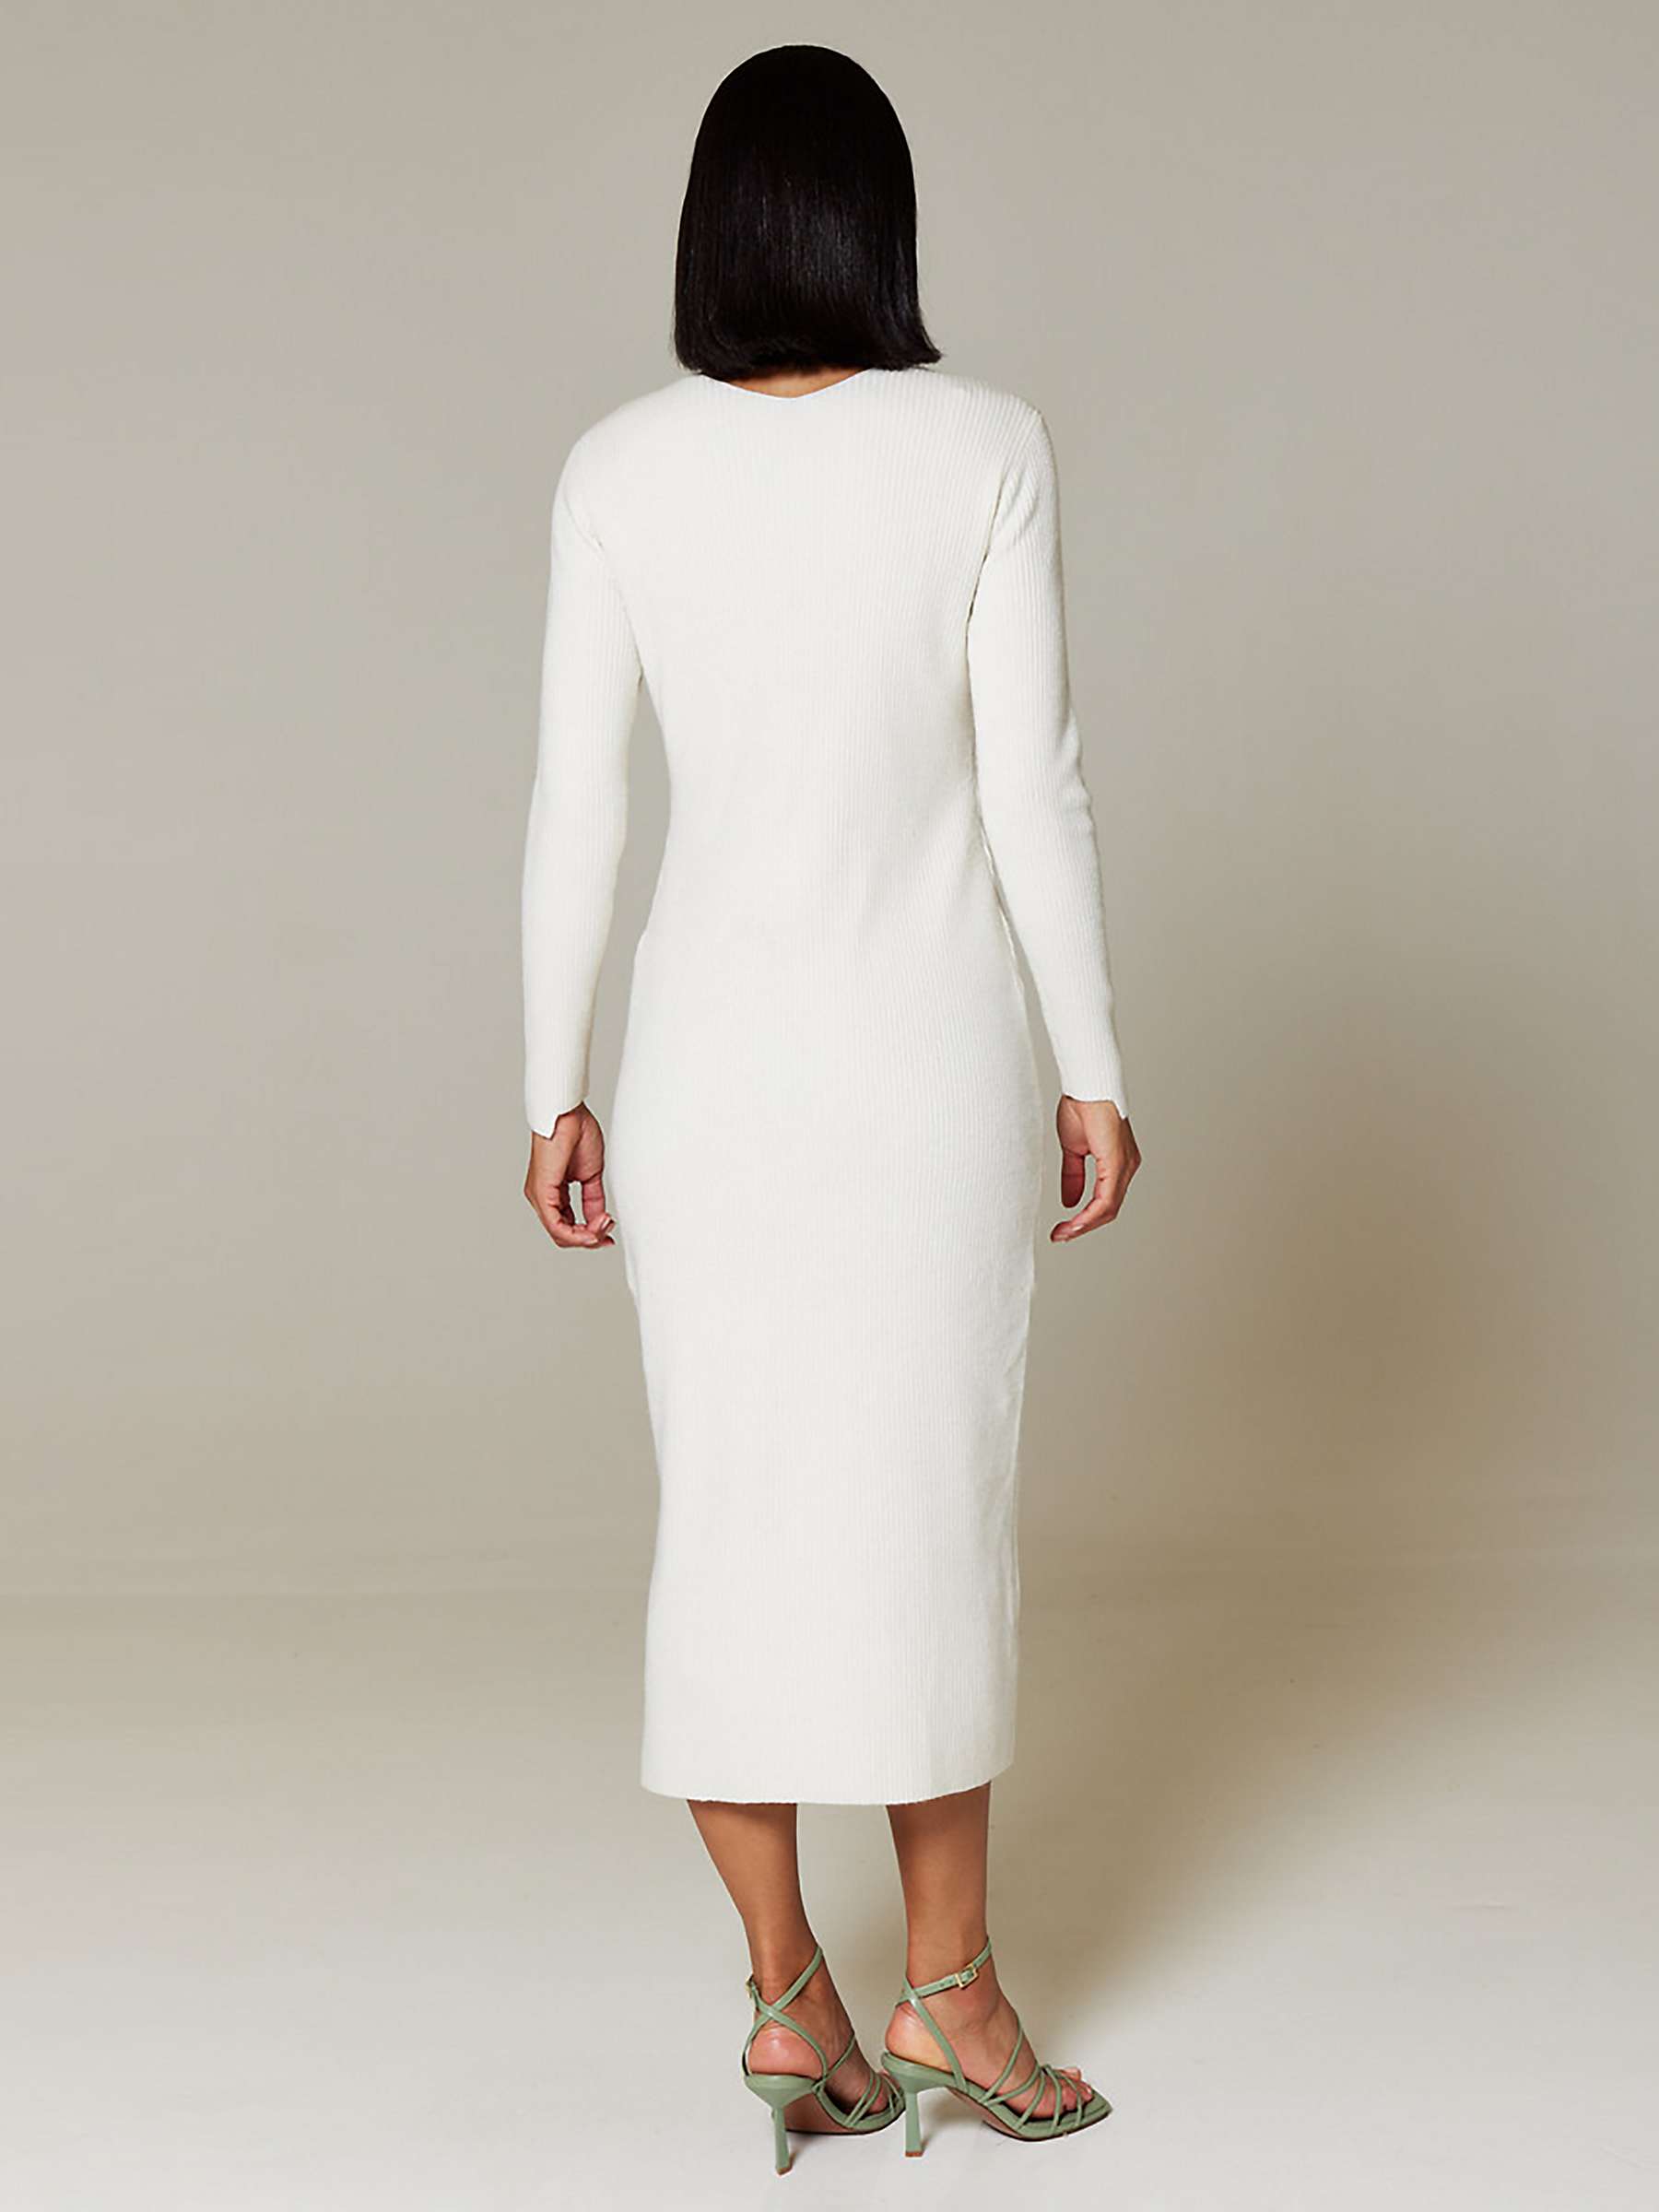 Buy Closet London Knitted Pencil Dress Online at johnlewis.com